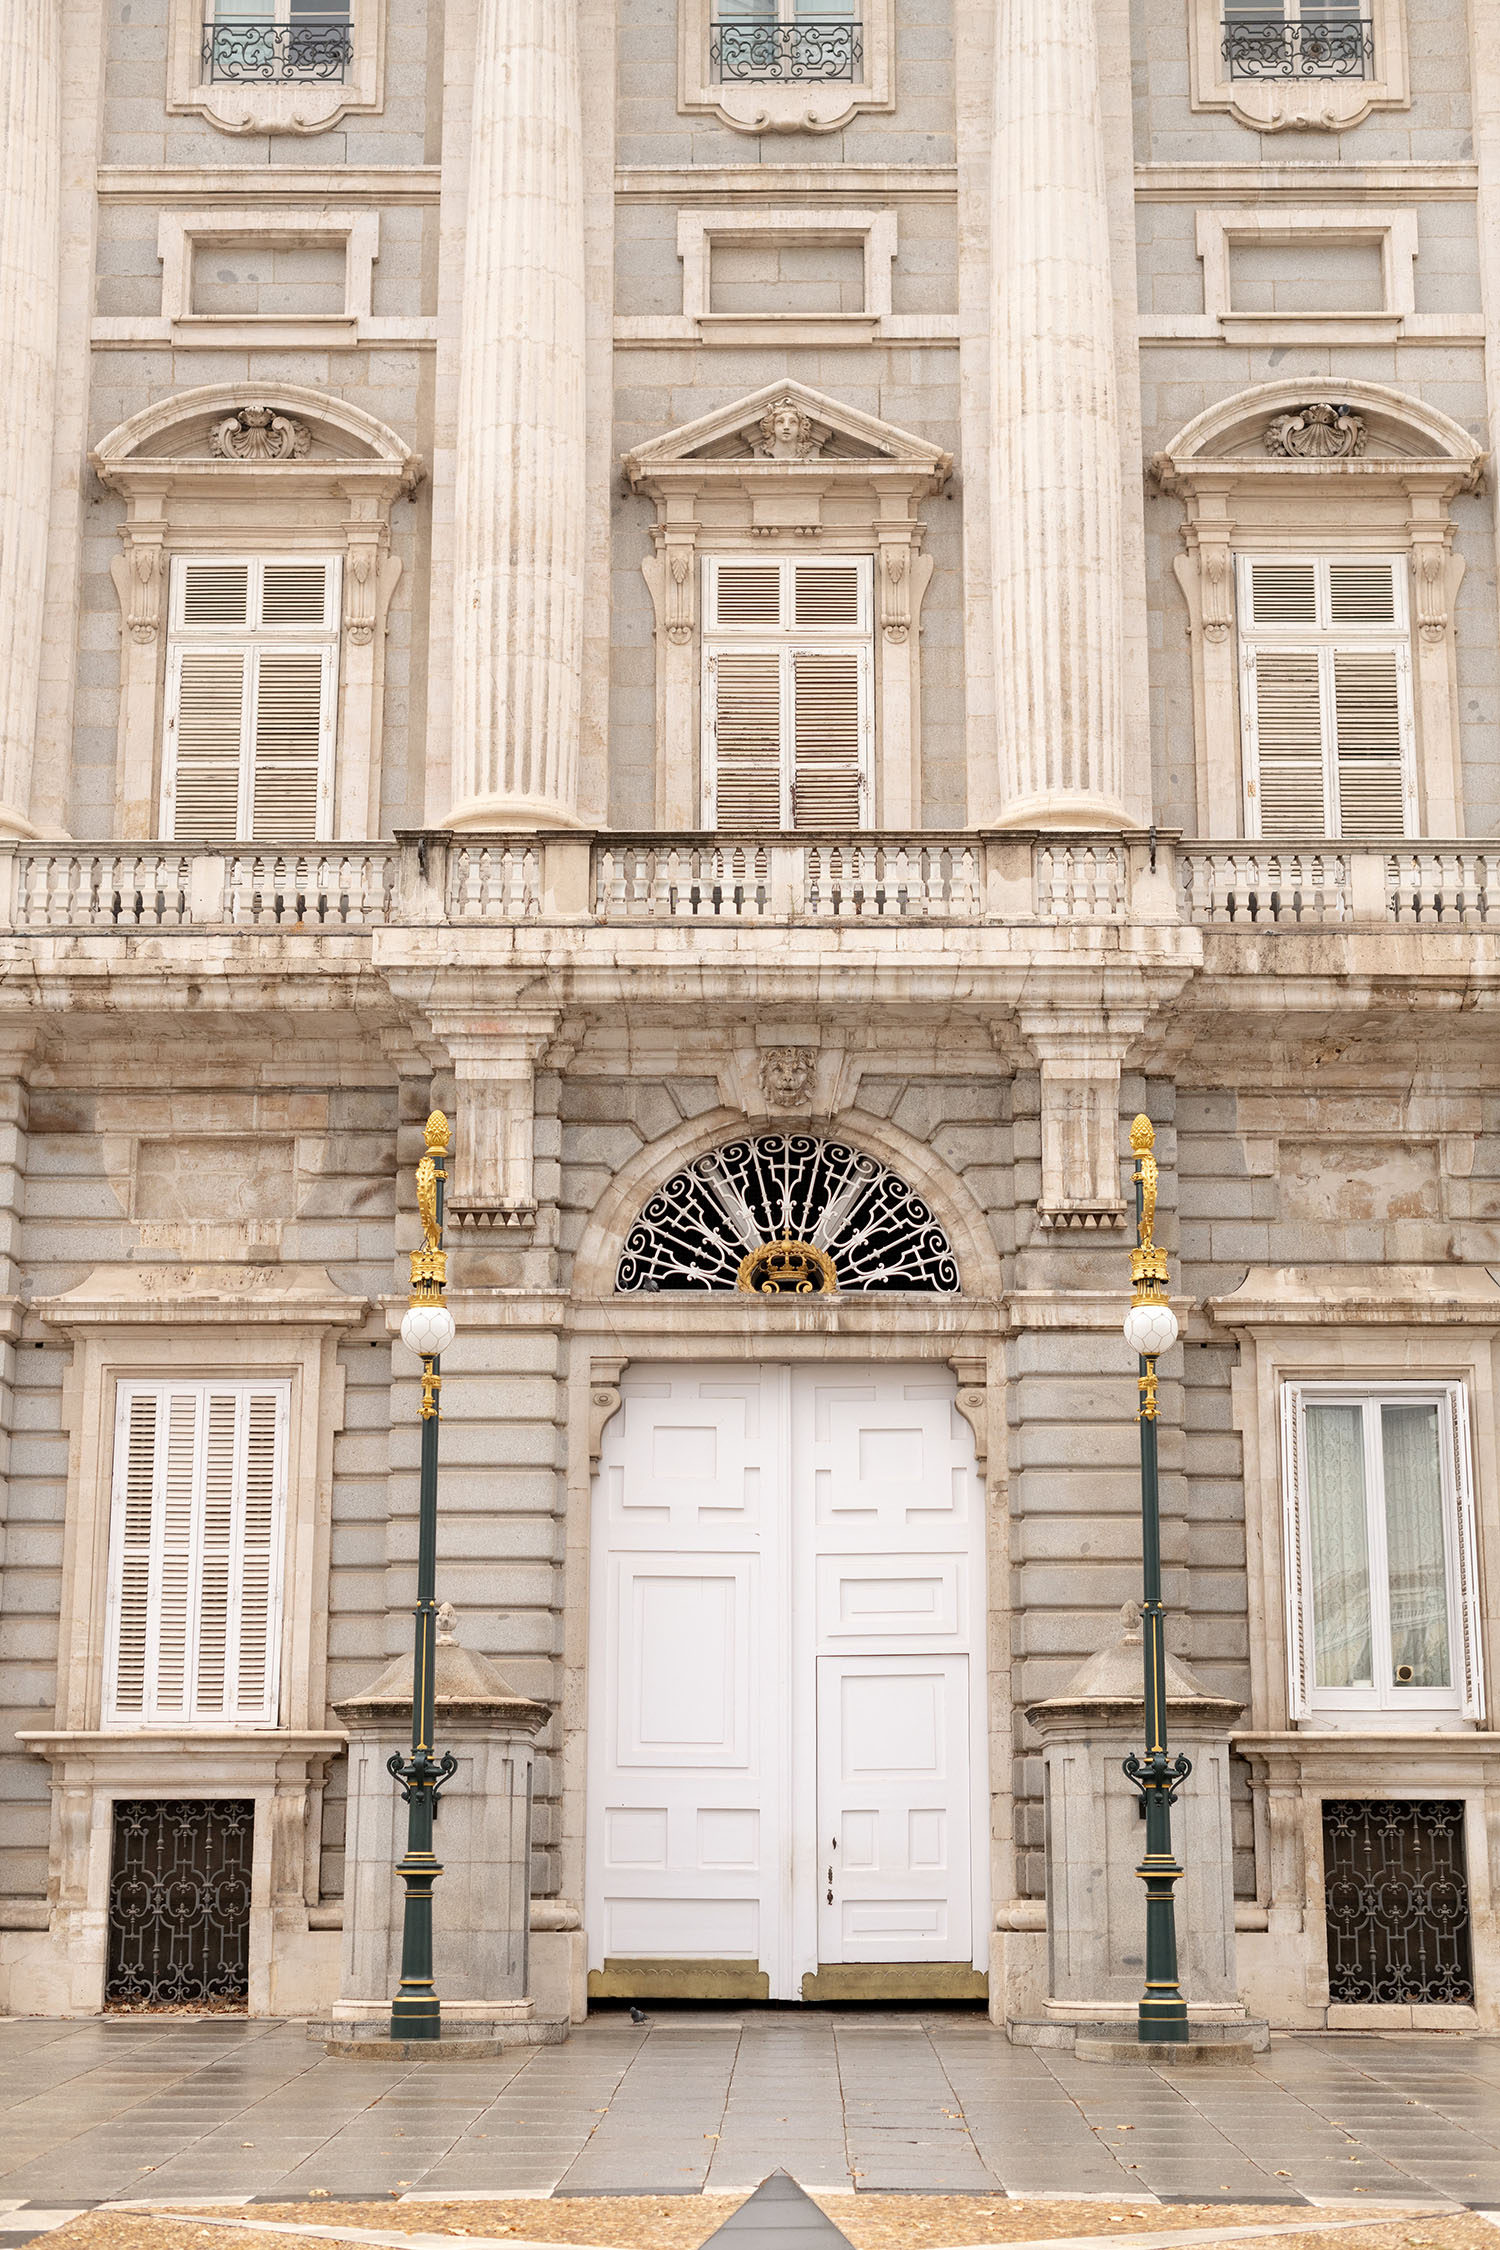 Coco & Voltaire - White door on the Palacio Real in Madrid